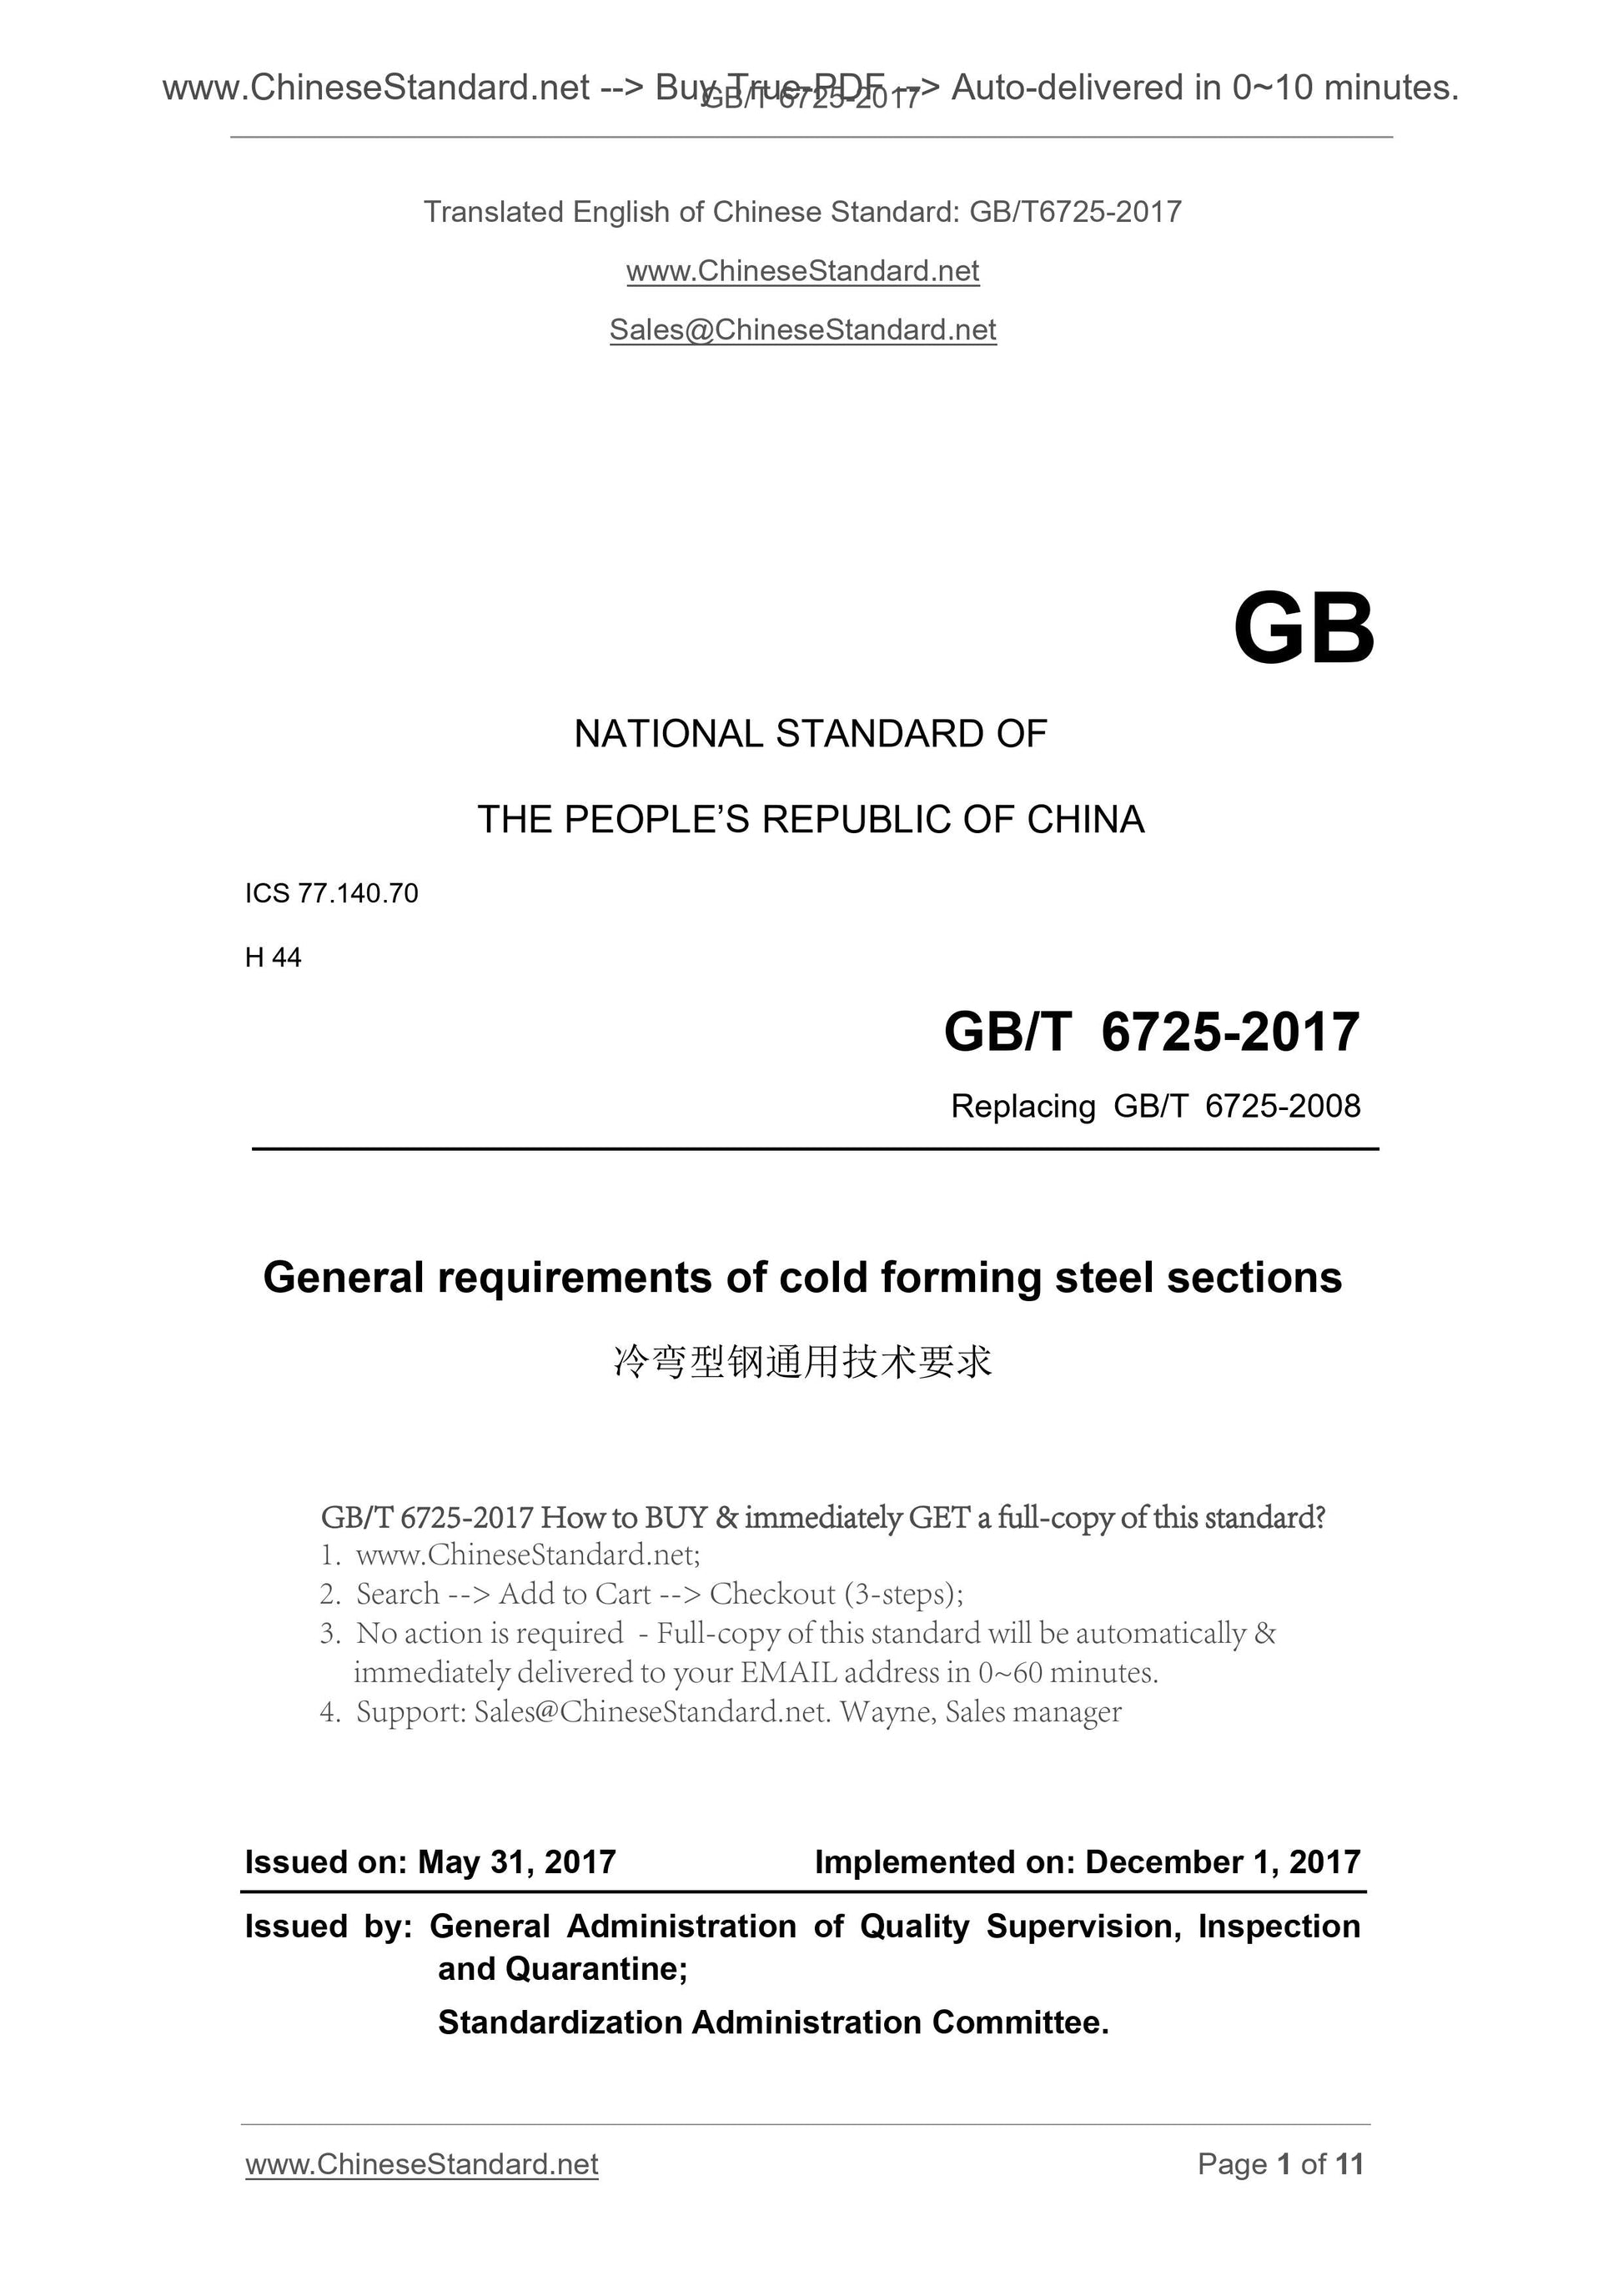 GB/T 6725-2017 Page 1